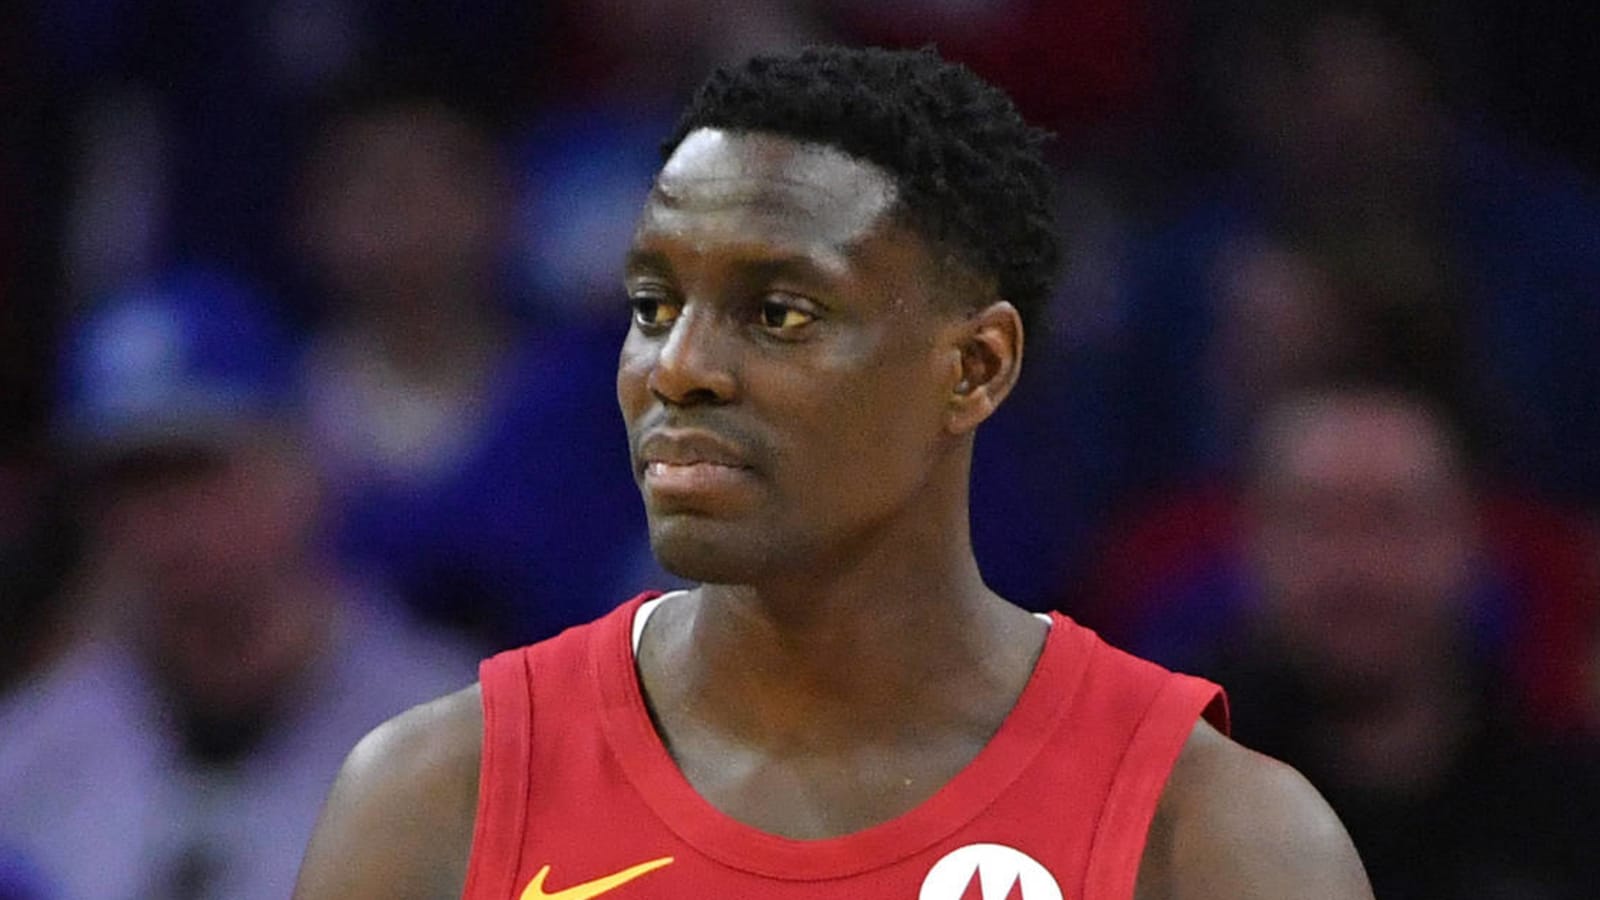 Darren Collison hoping to sign with Lakers?